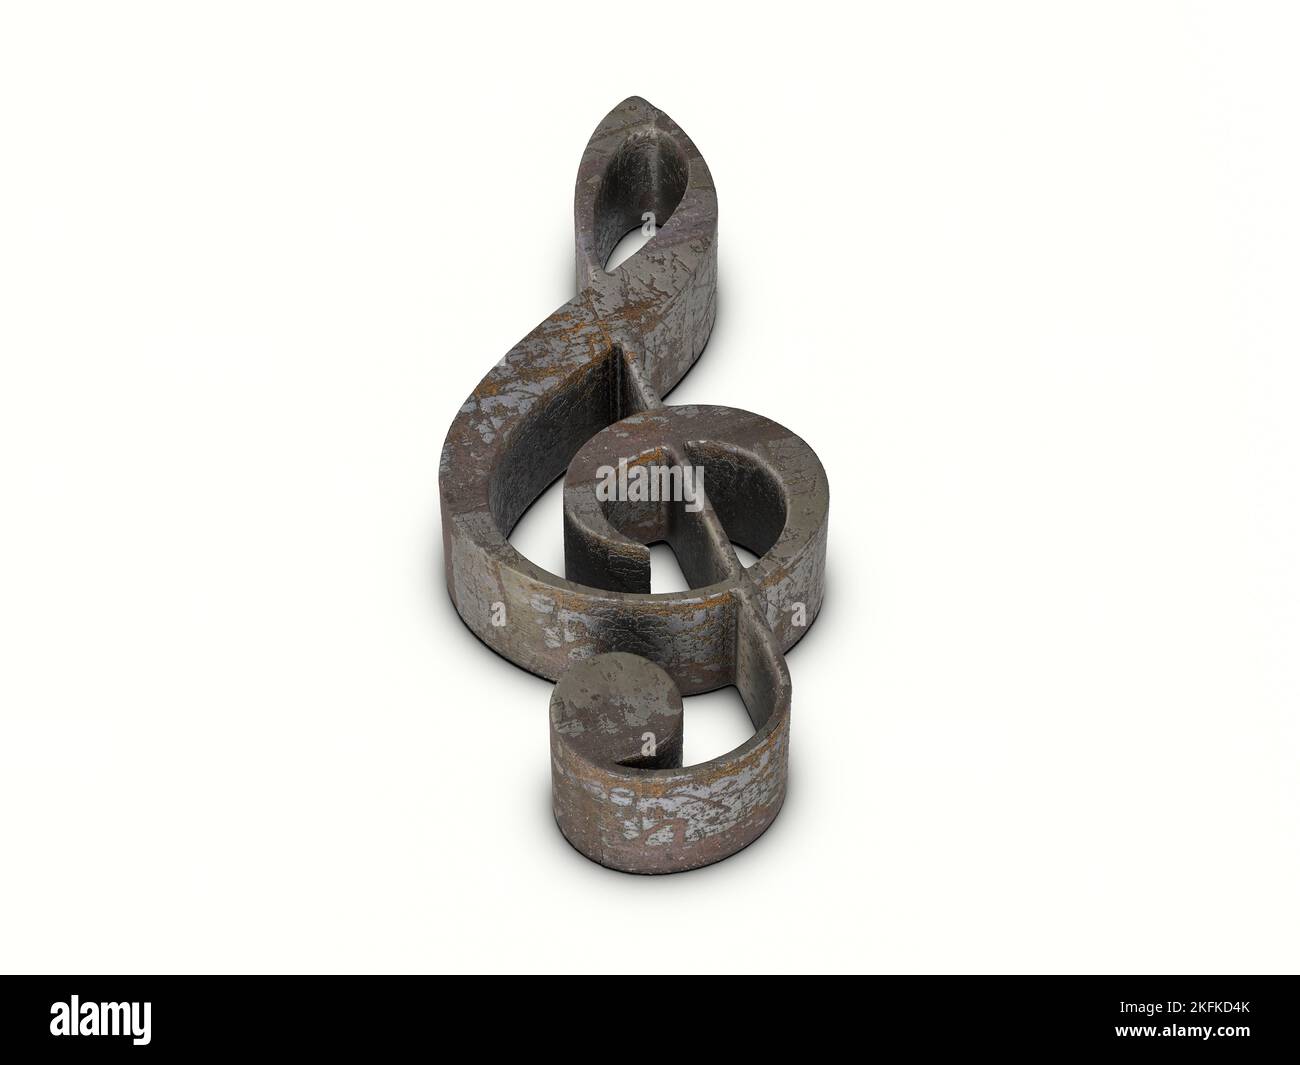 Rusty metal music note symbol on a white background. 3d illustration. Stock Photo